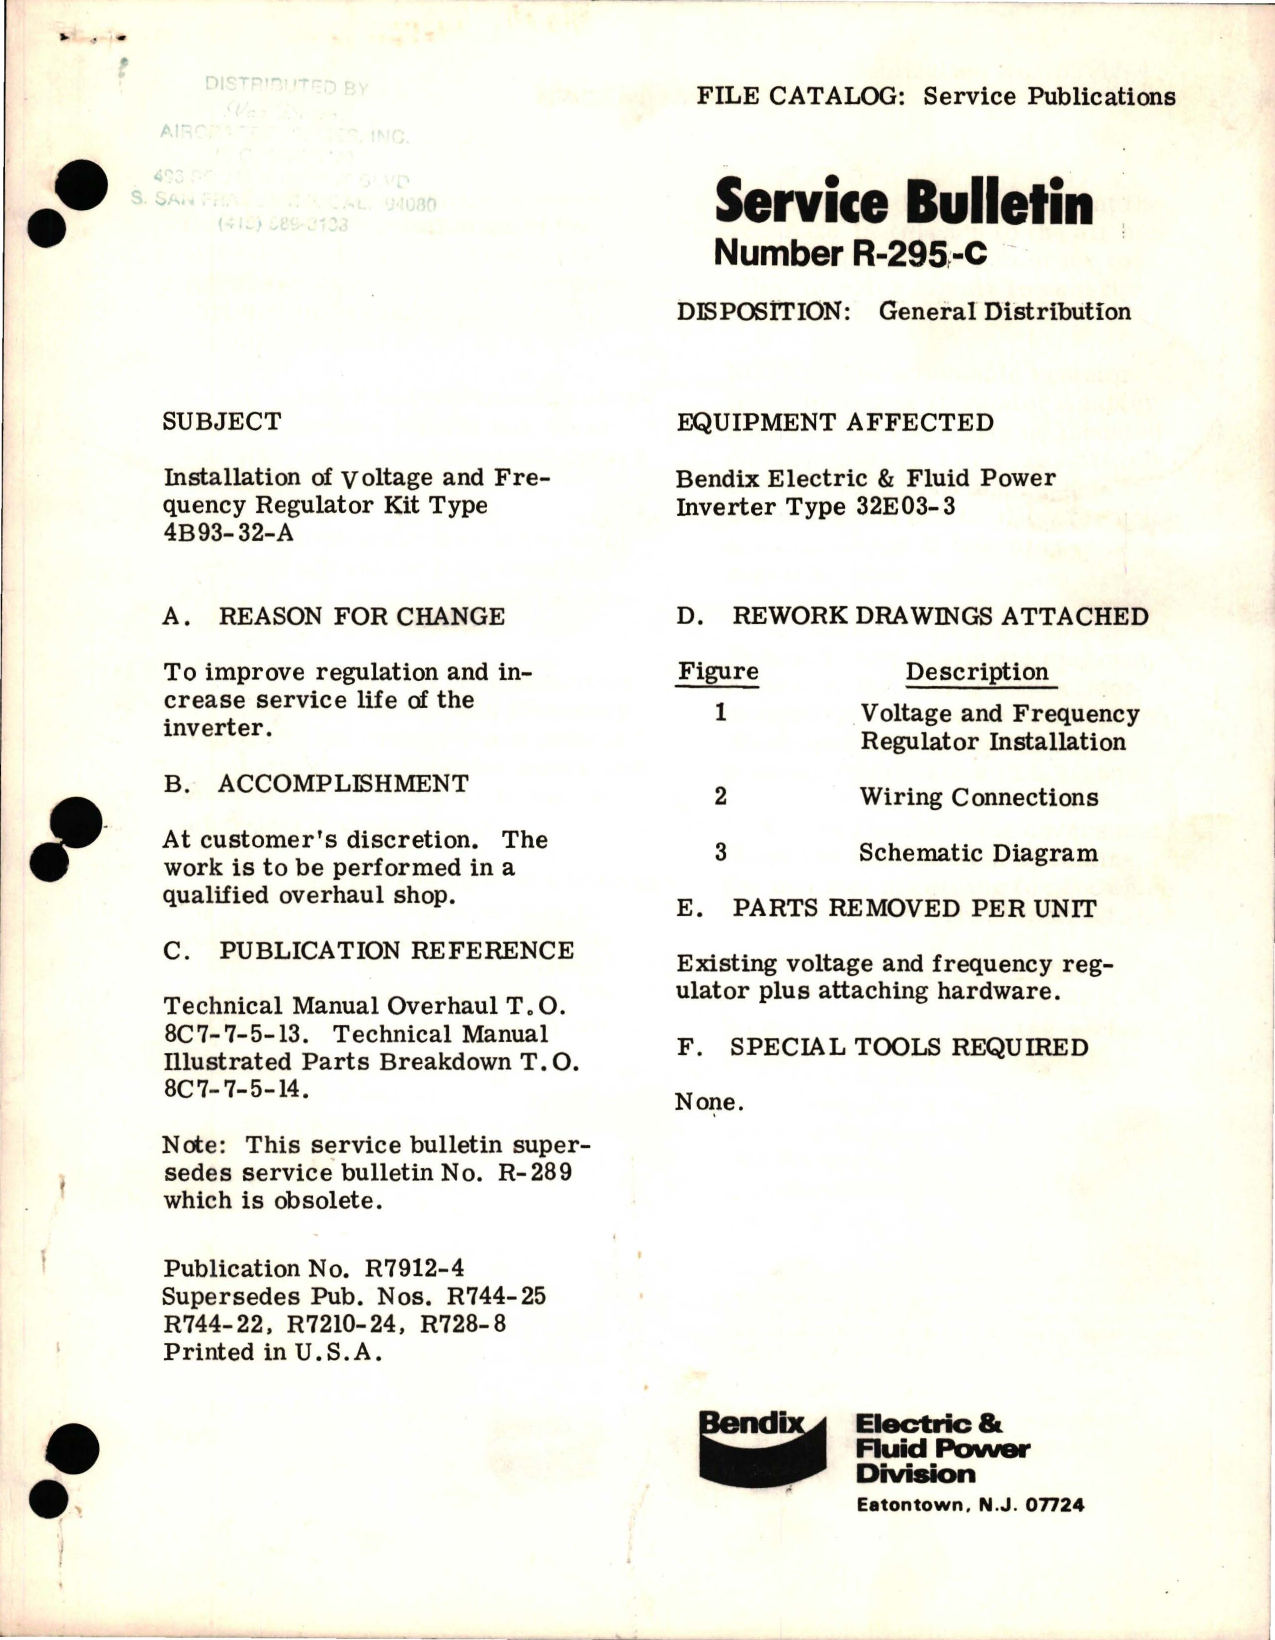 Sample page 1 from AirCorps Library document: Installation of Voltage and Frequency Regulator Kit - Type 4B93-32-A